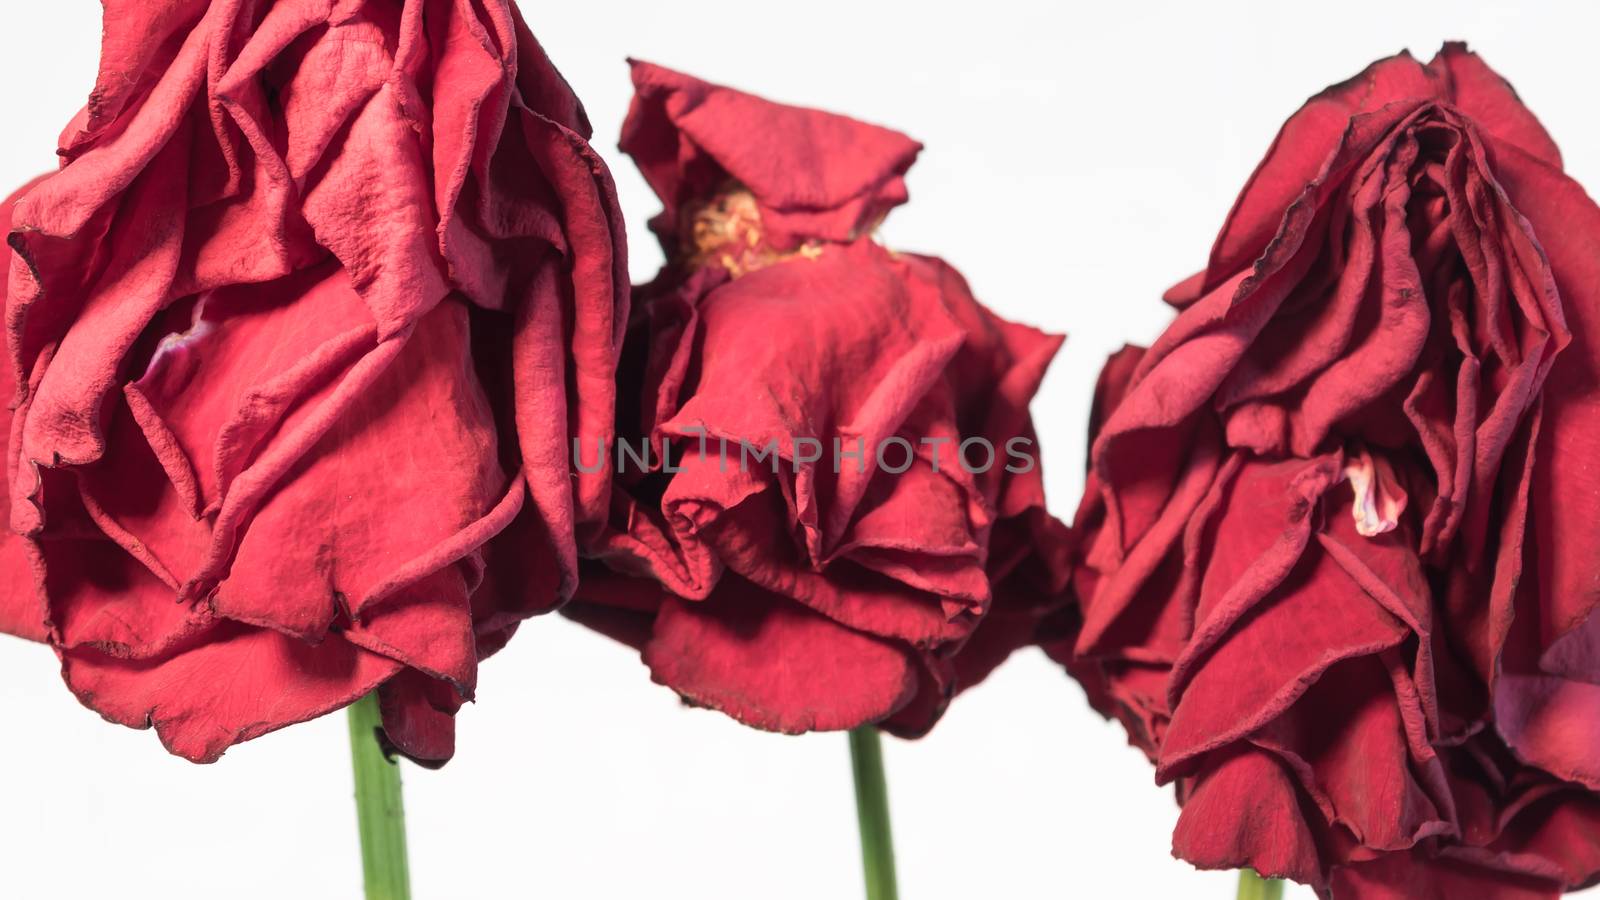 Three wilted roses on a white brick background. Dead dried old f by YevgeniySam